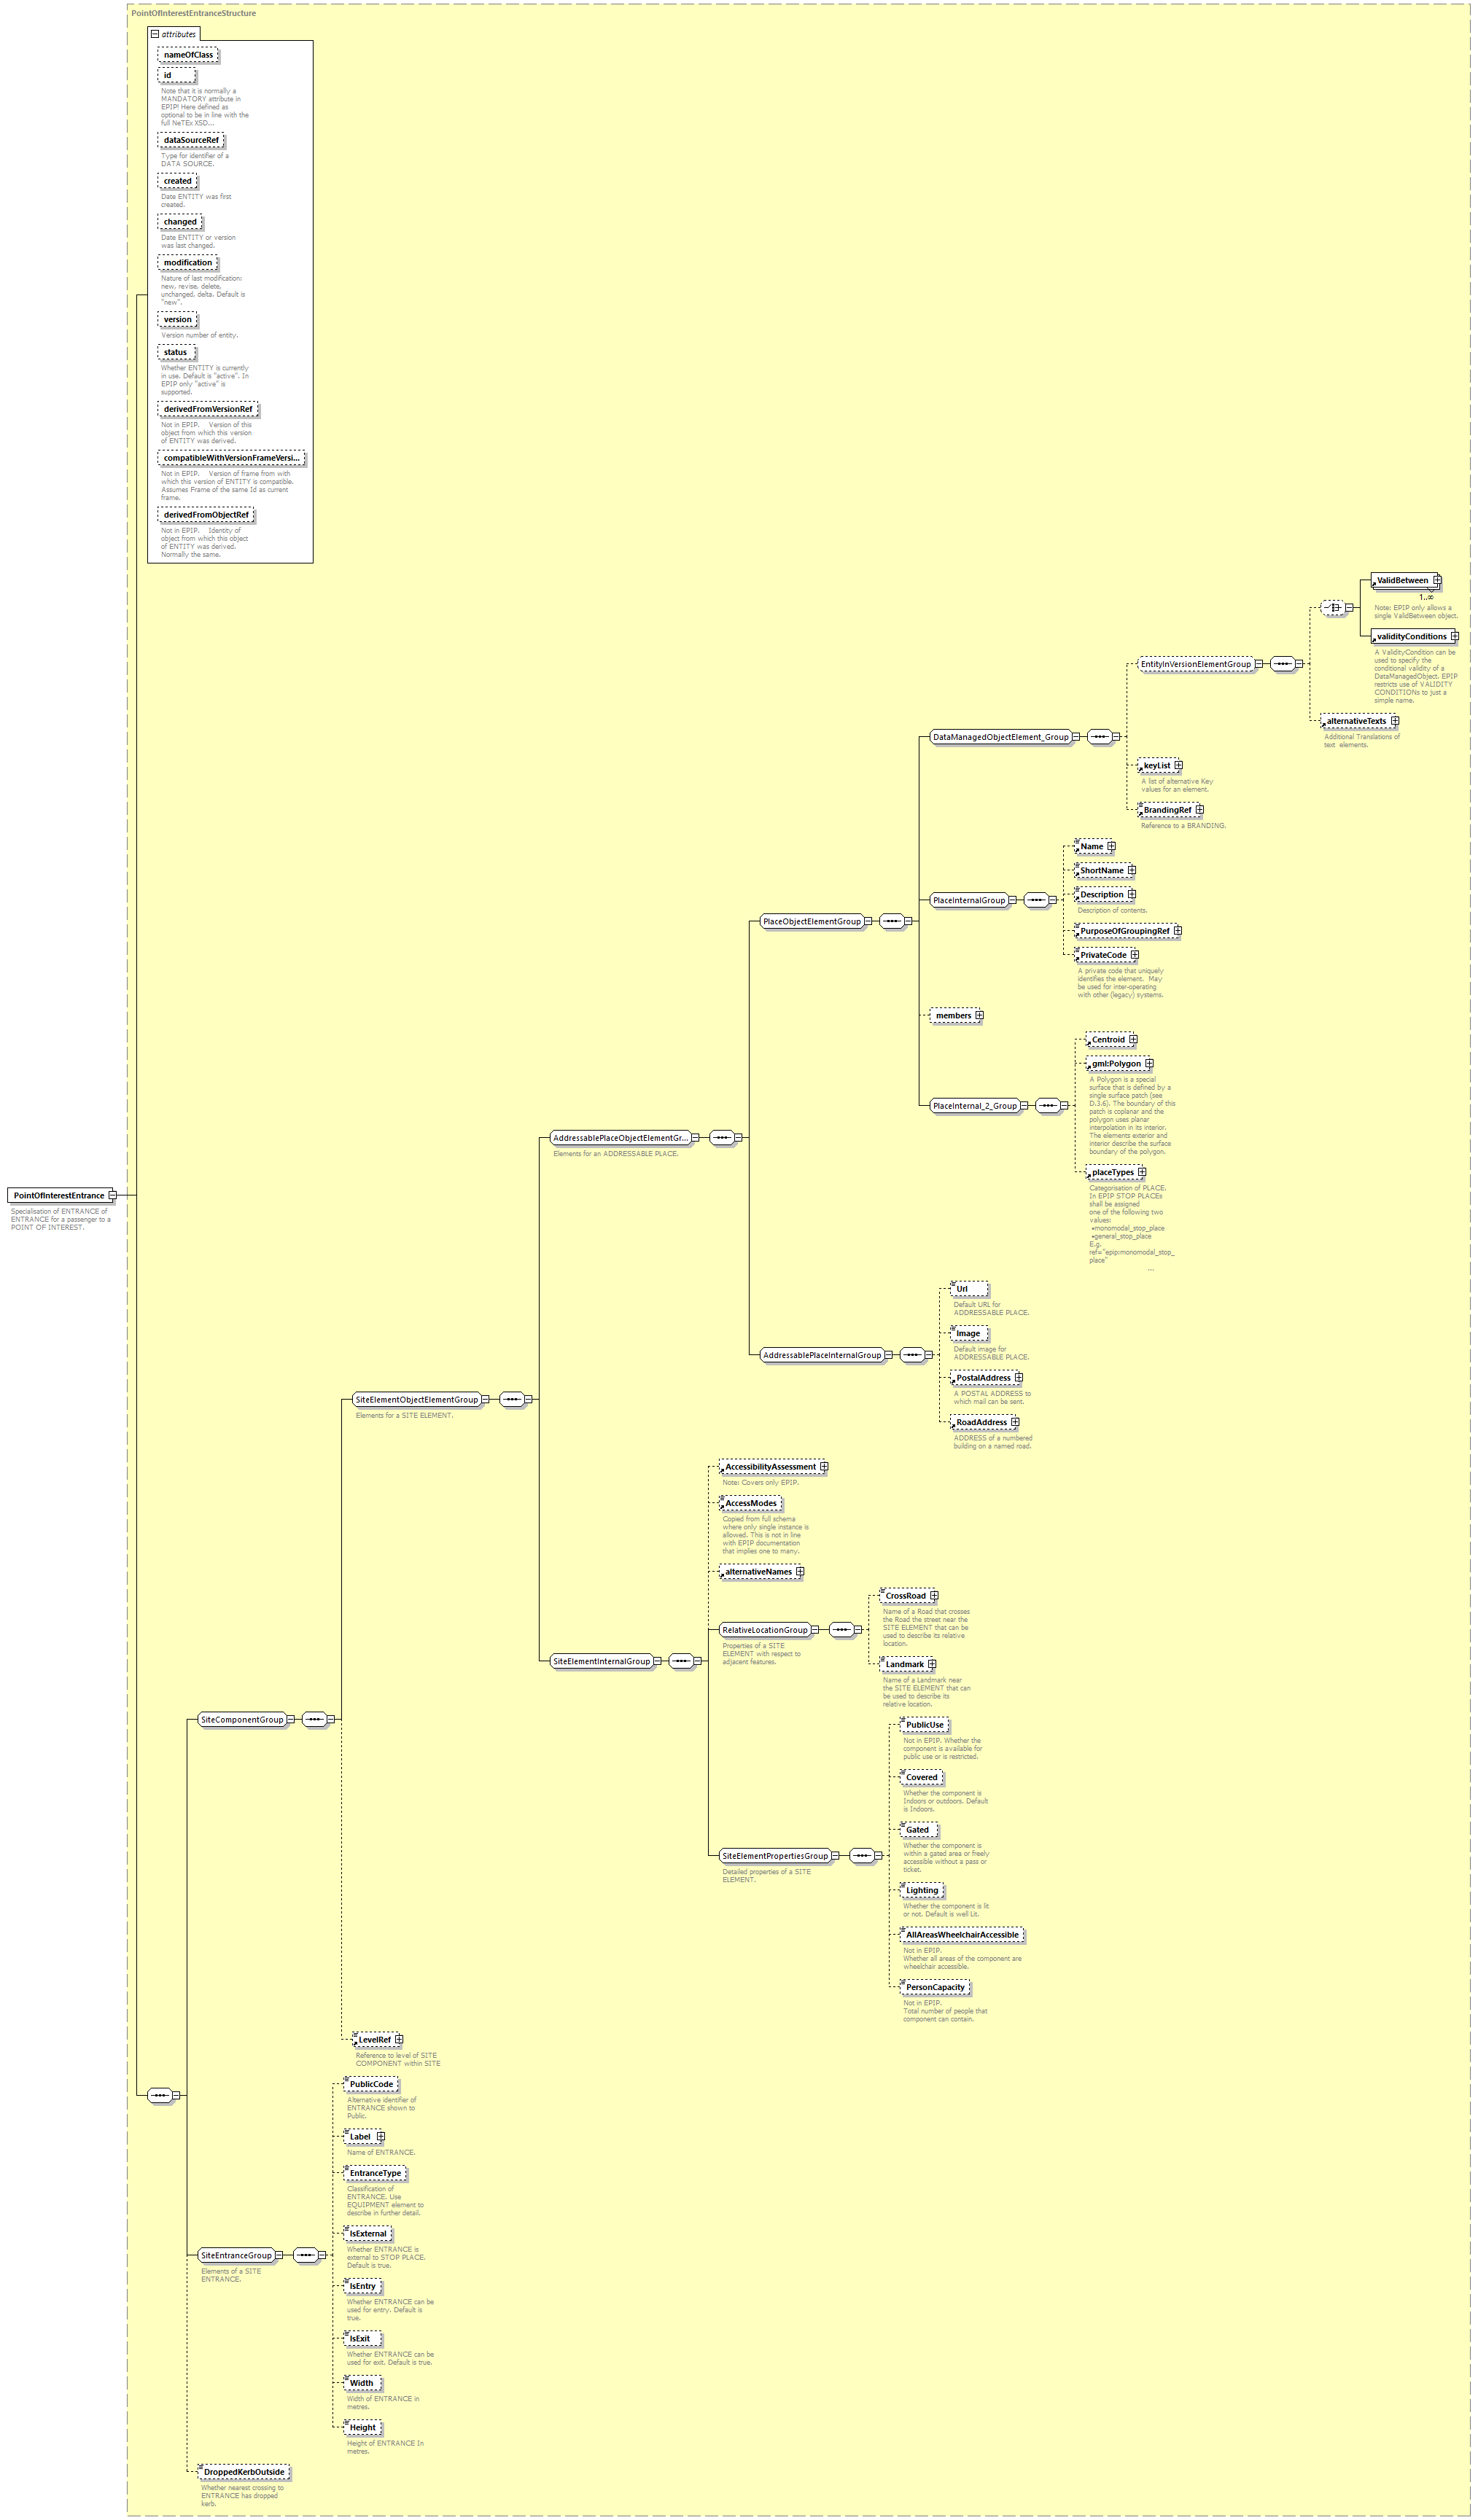 reduced_diagrams/reduced_p330.png